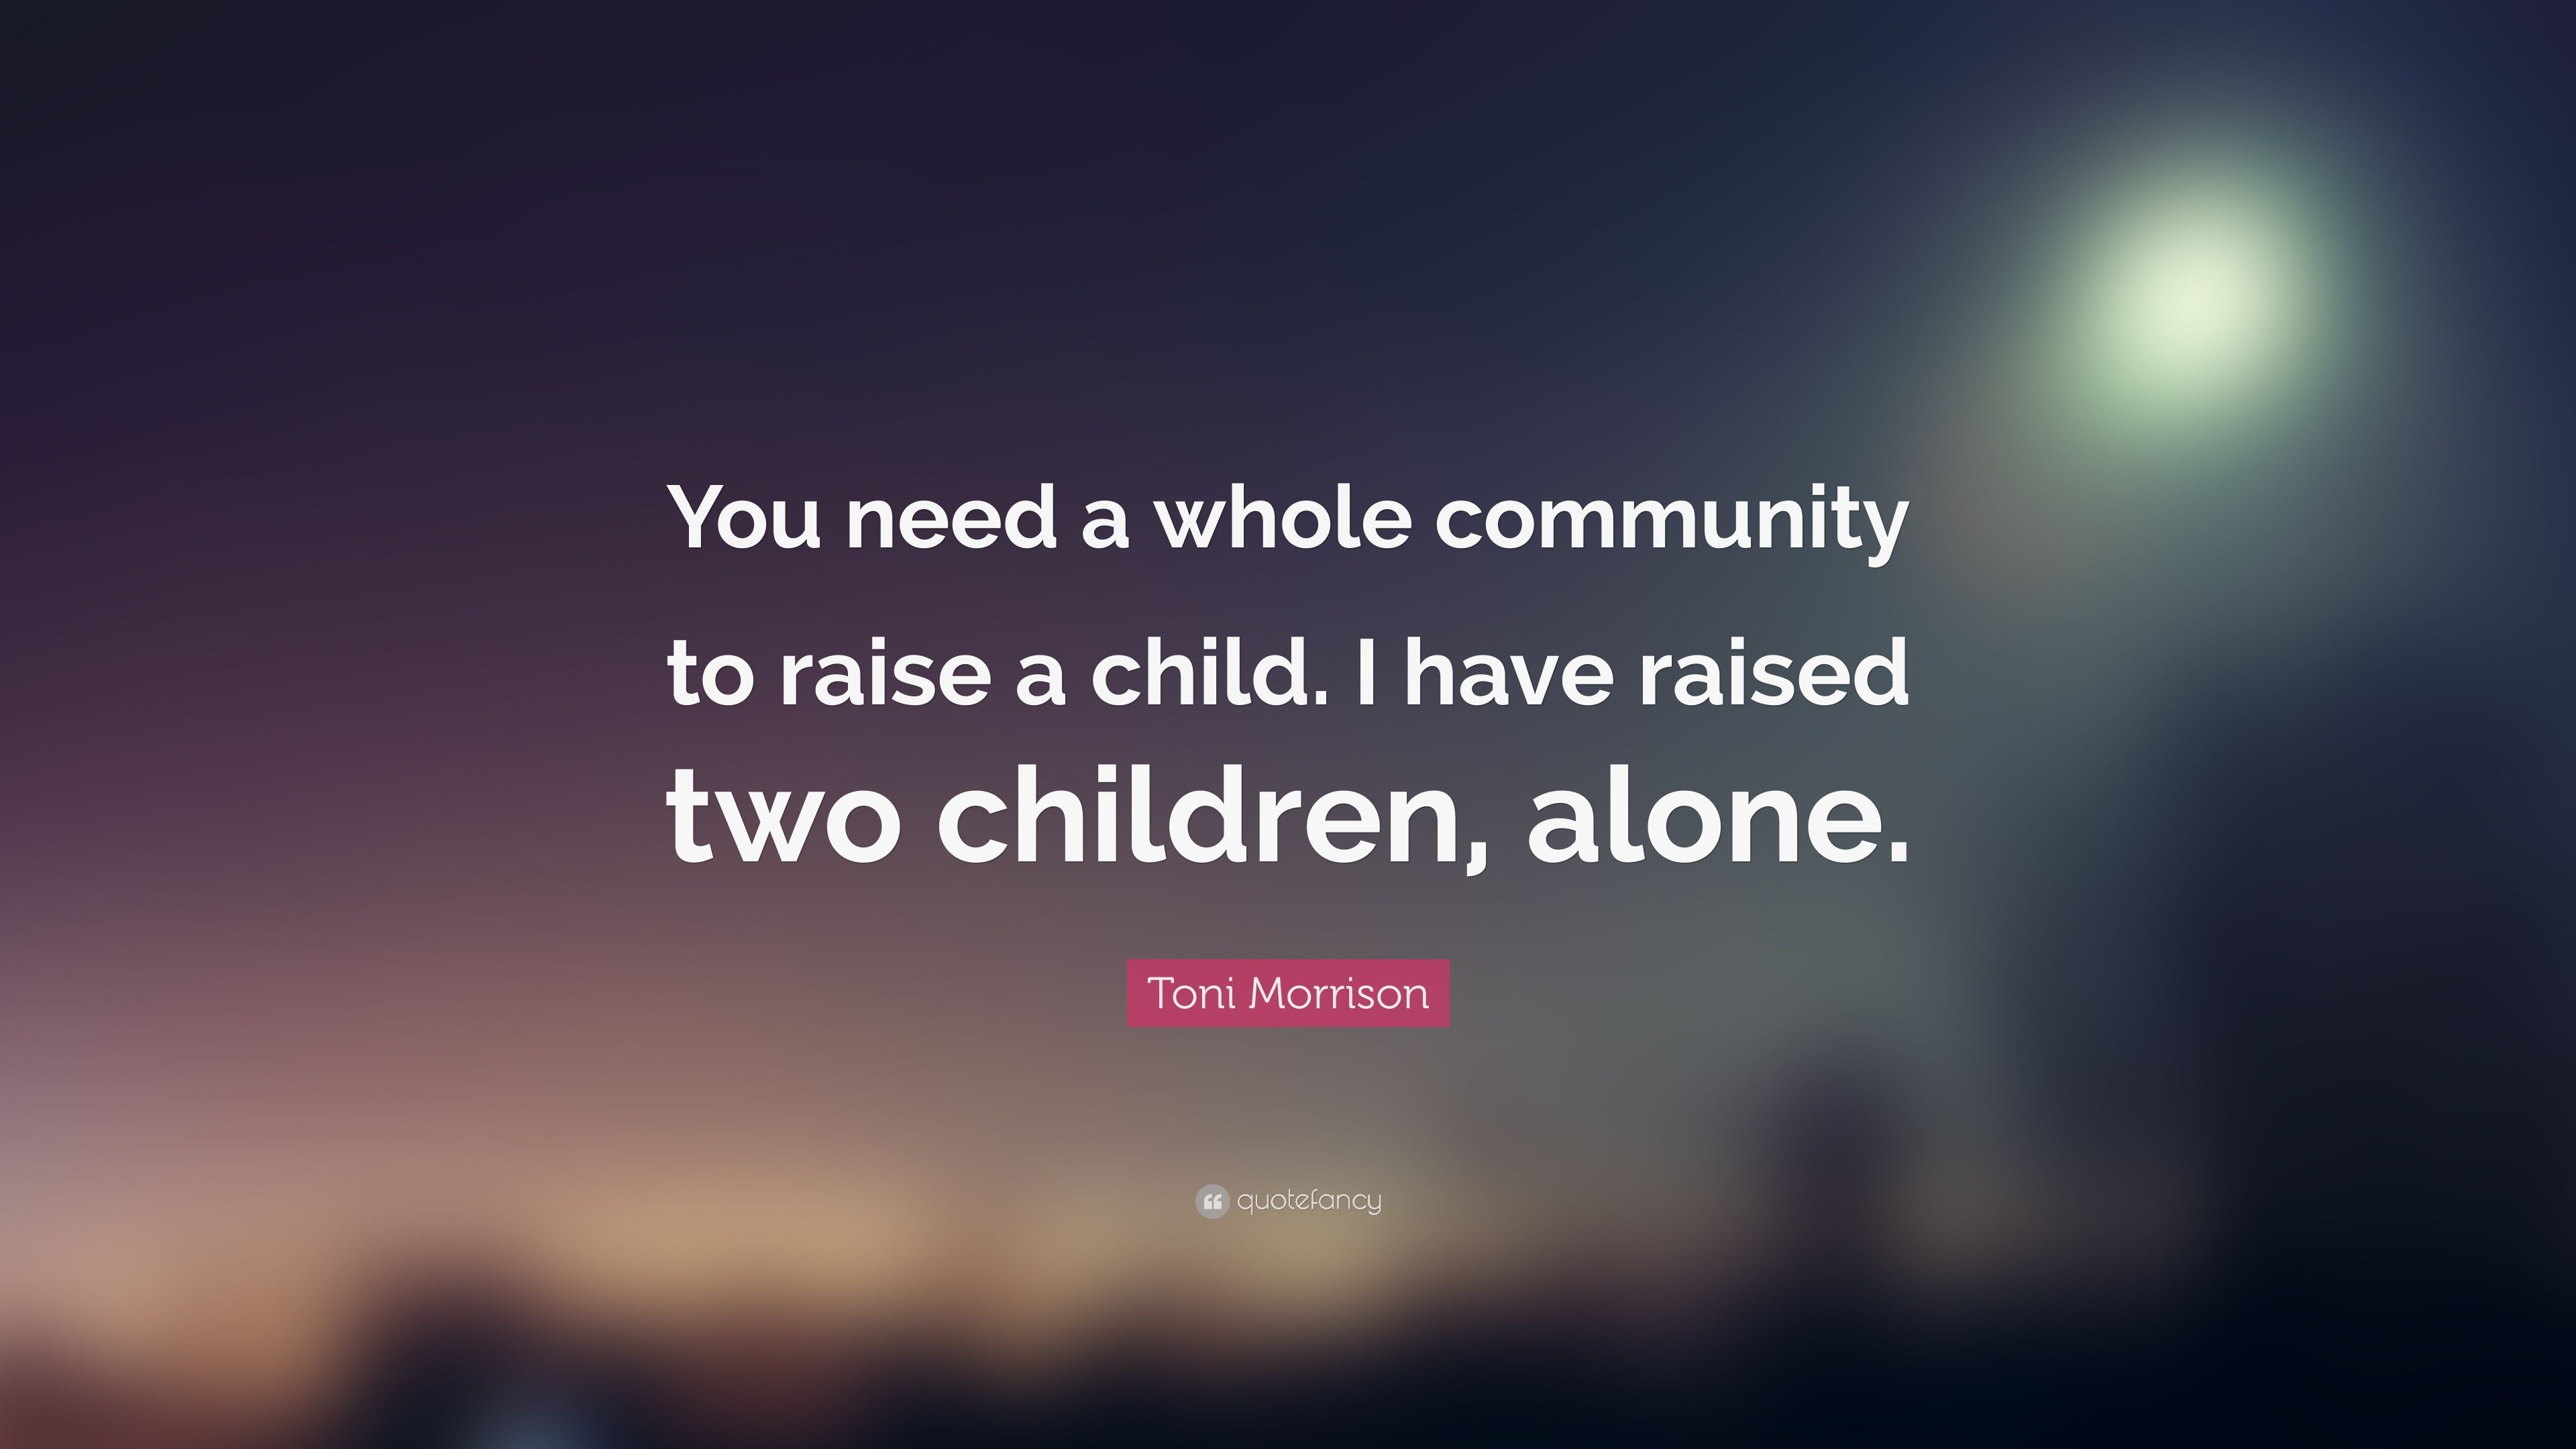 Toni Morrison Quote: “You need a whole community to raise a child